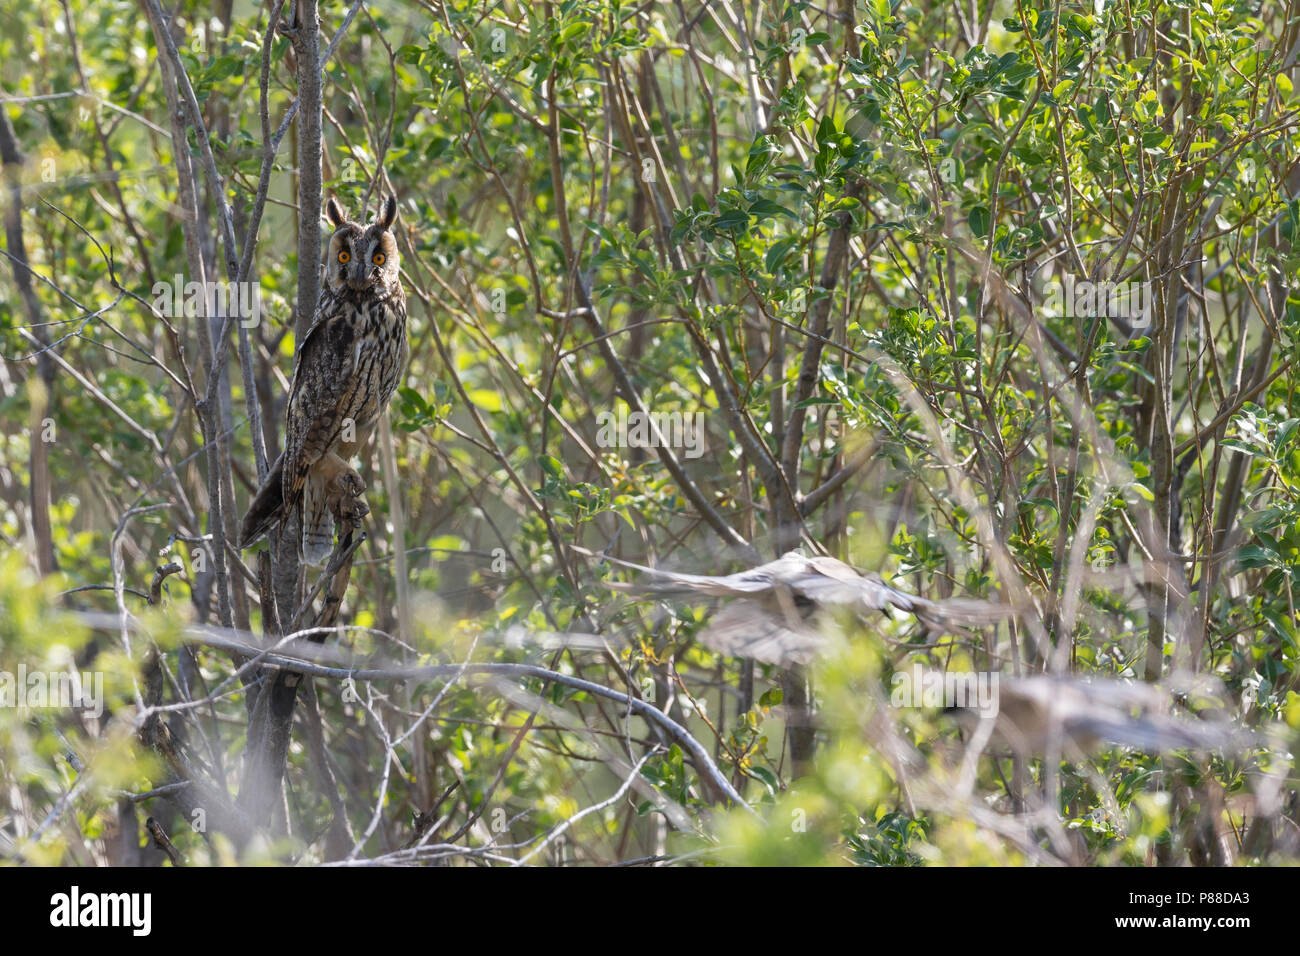 Long-eared Owl - Waldohreule - Asio otus otus, Russia (Baikal), adult, attacked by Asian Blue Magpie Stock Photo